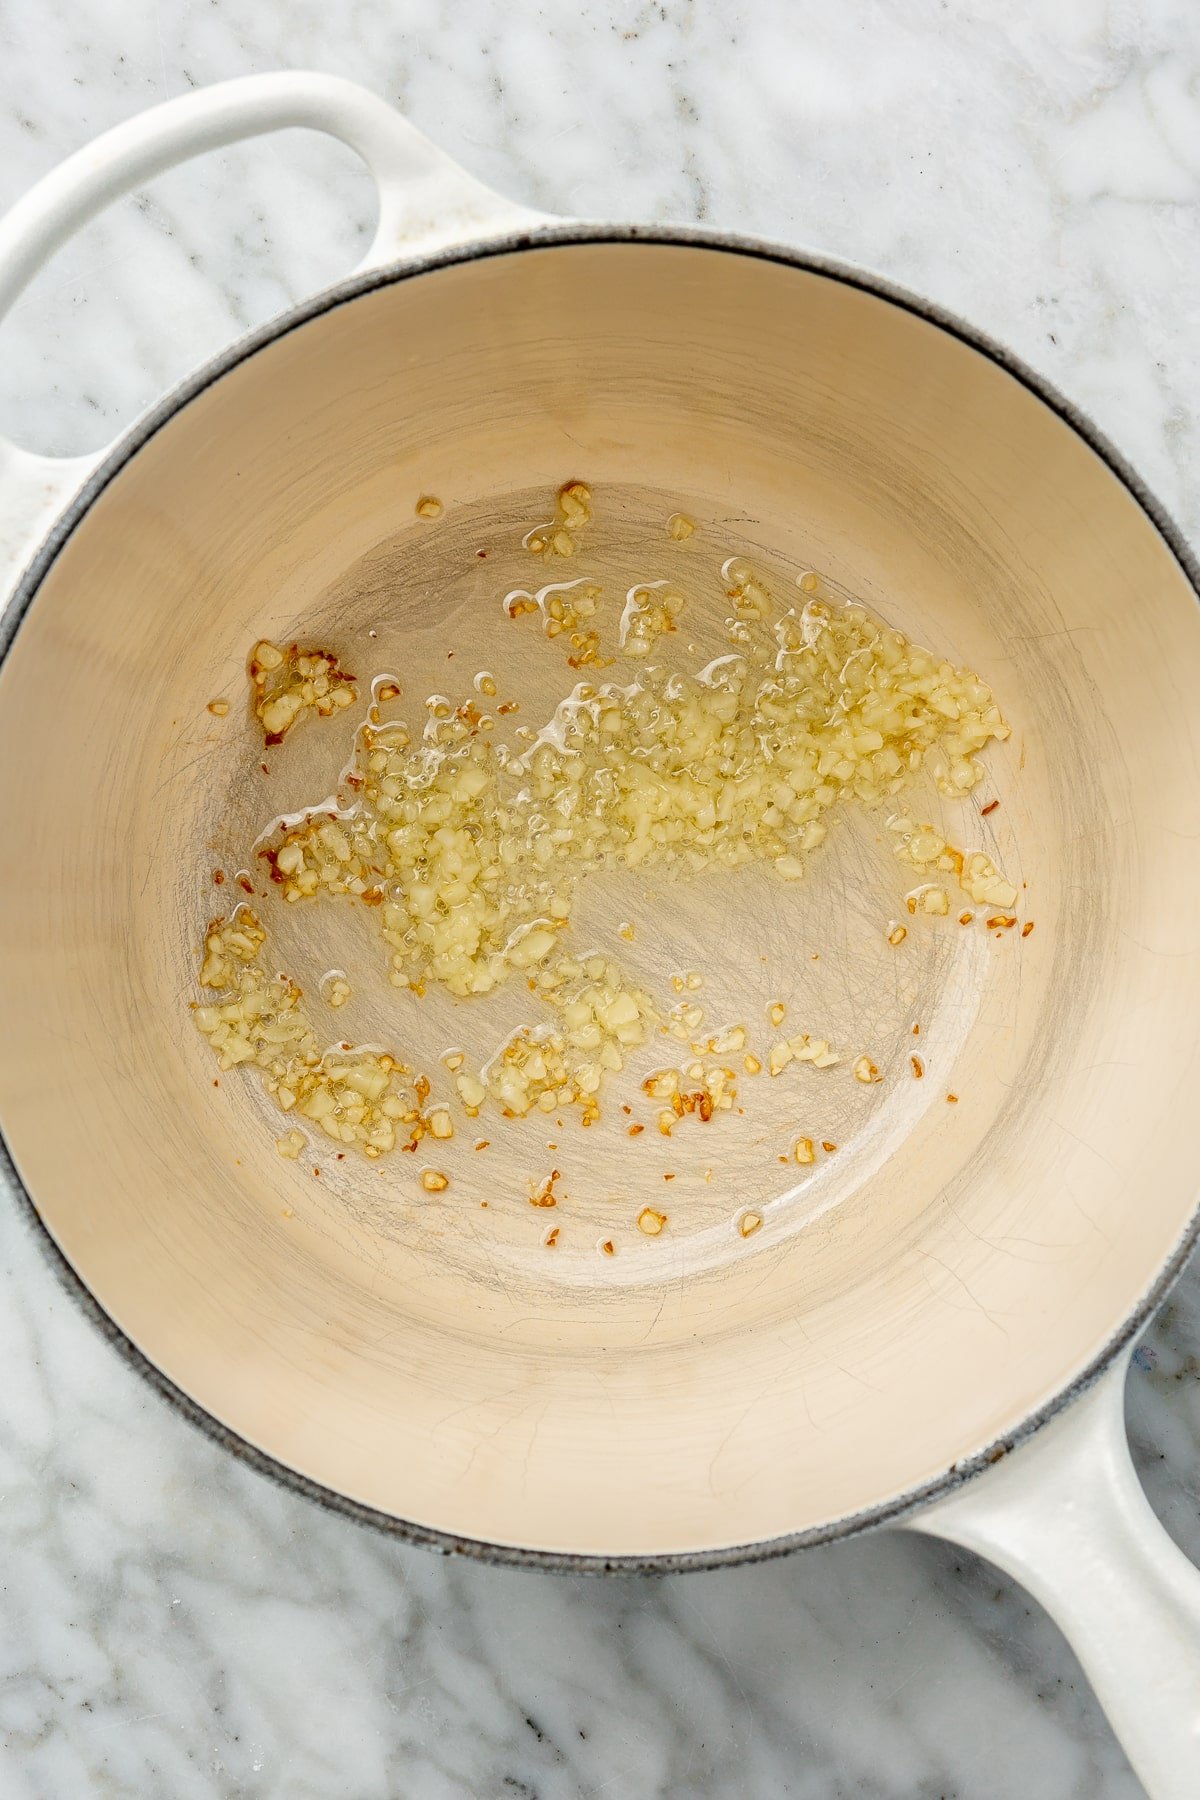 Minced garlic, oil, and variety of spices have been added to a nonstick, stovetop pan.